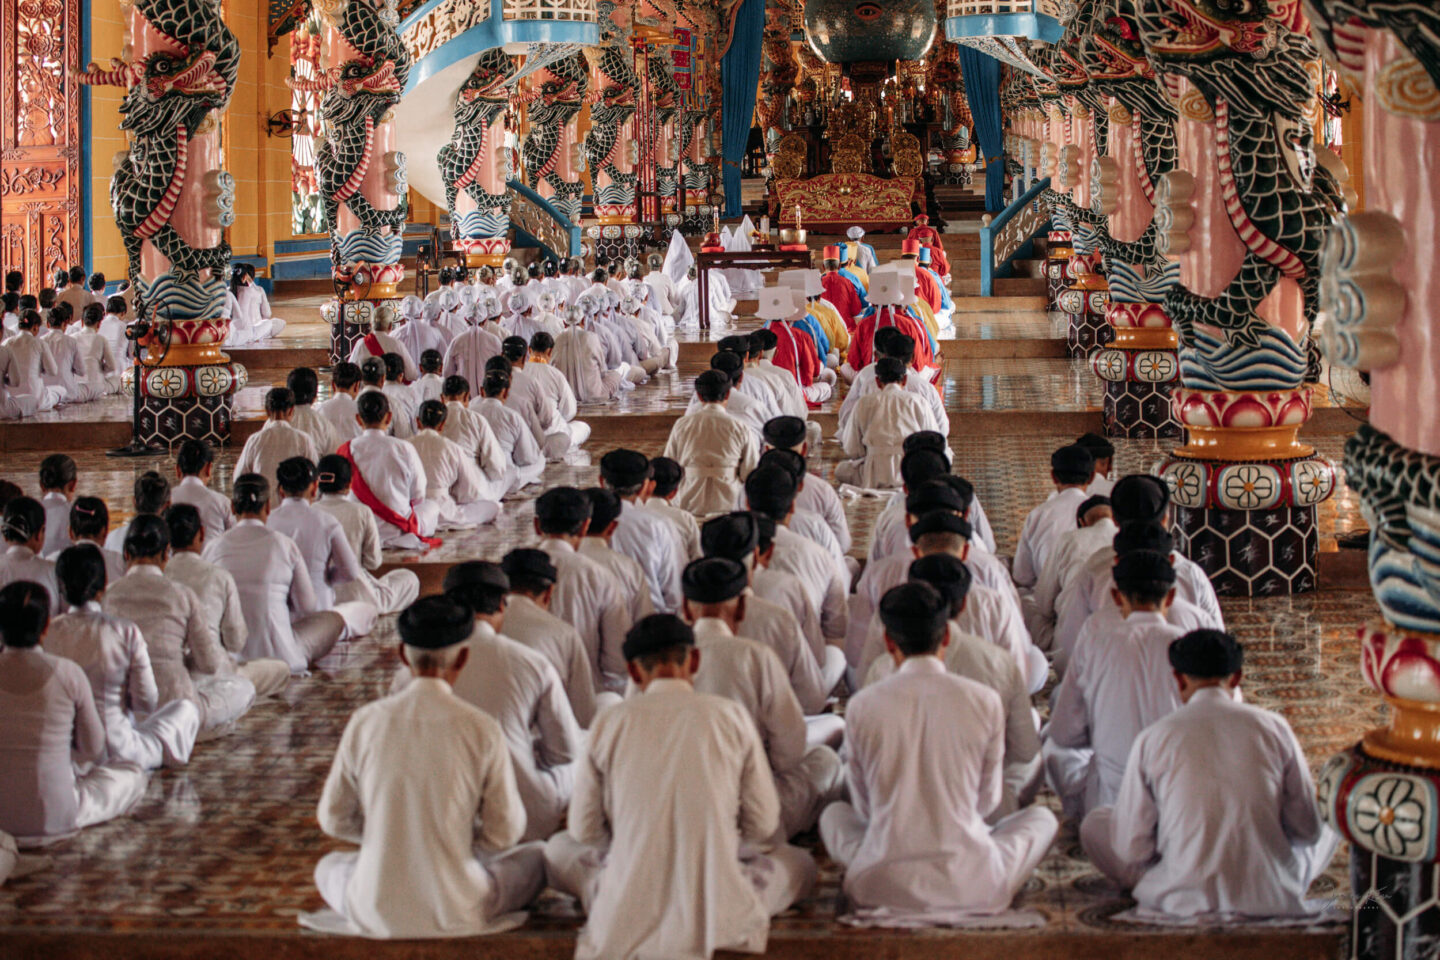 Worshippers attend a Caodaism ceremony in Cao Dai Temple, northwest of Ho Chi Minh City, Southeast Vietnam.